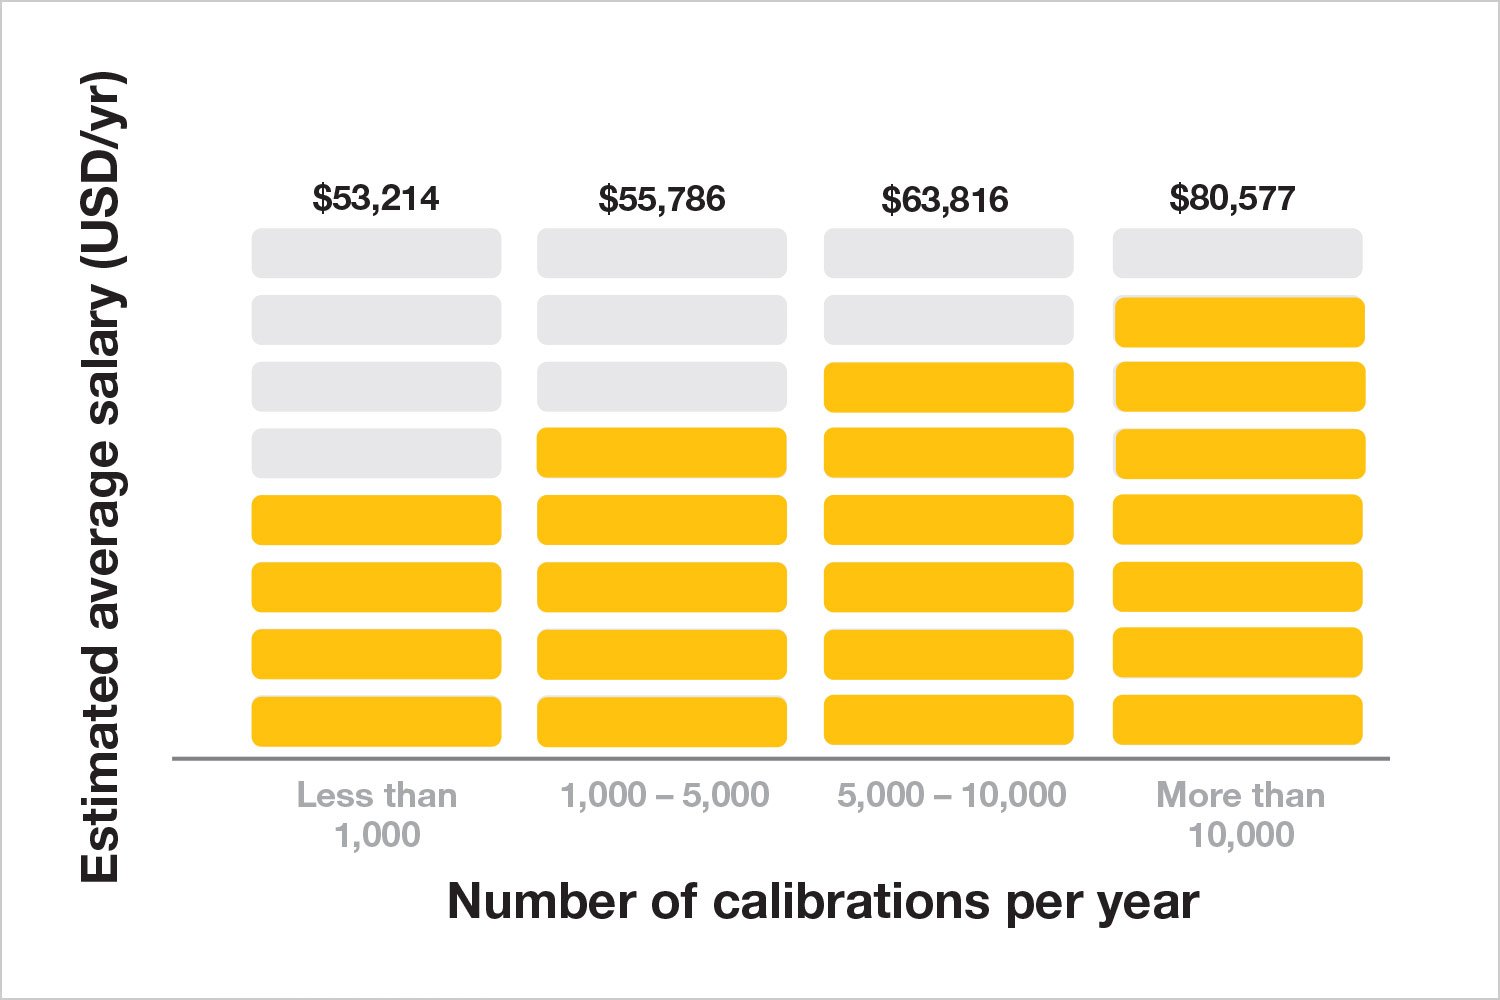 Number of calibrations per year chart